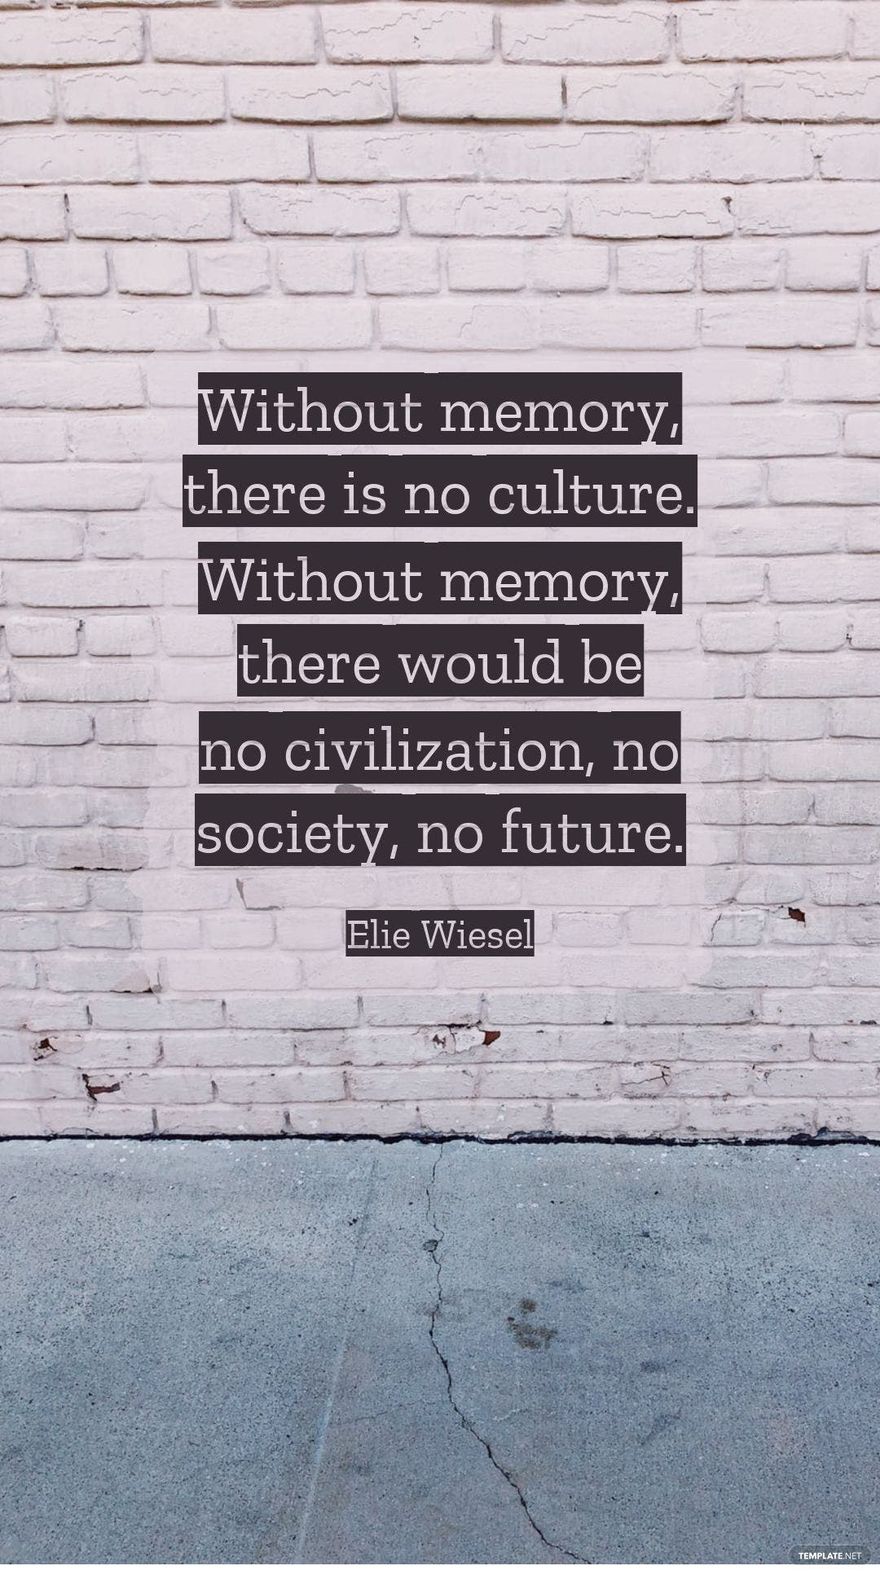 Elie Wiesel - Without memory, there is no culture. Without memory, there would be no civilization, no society, no future.